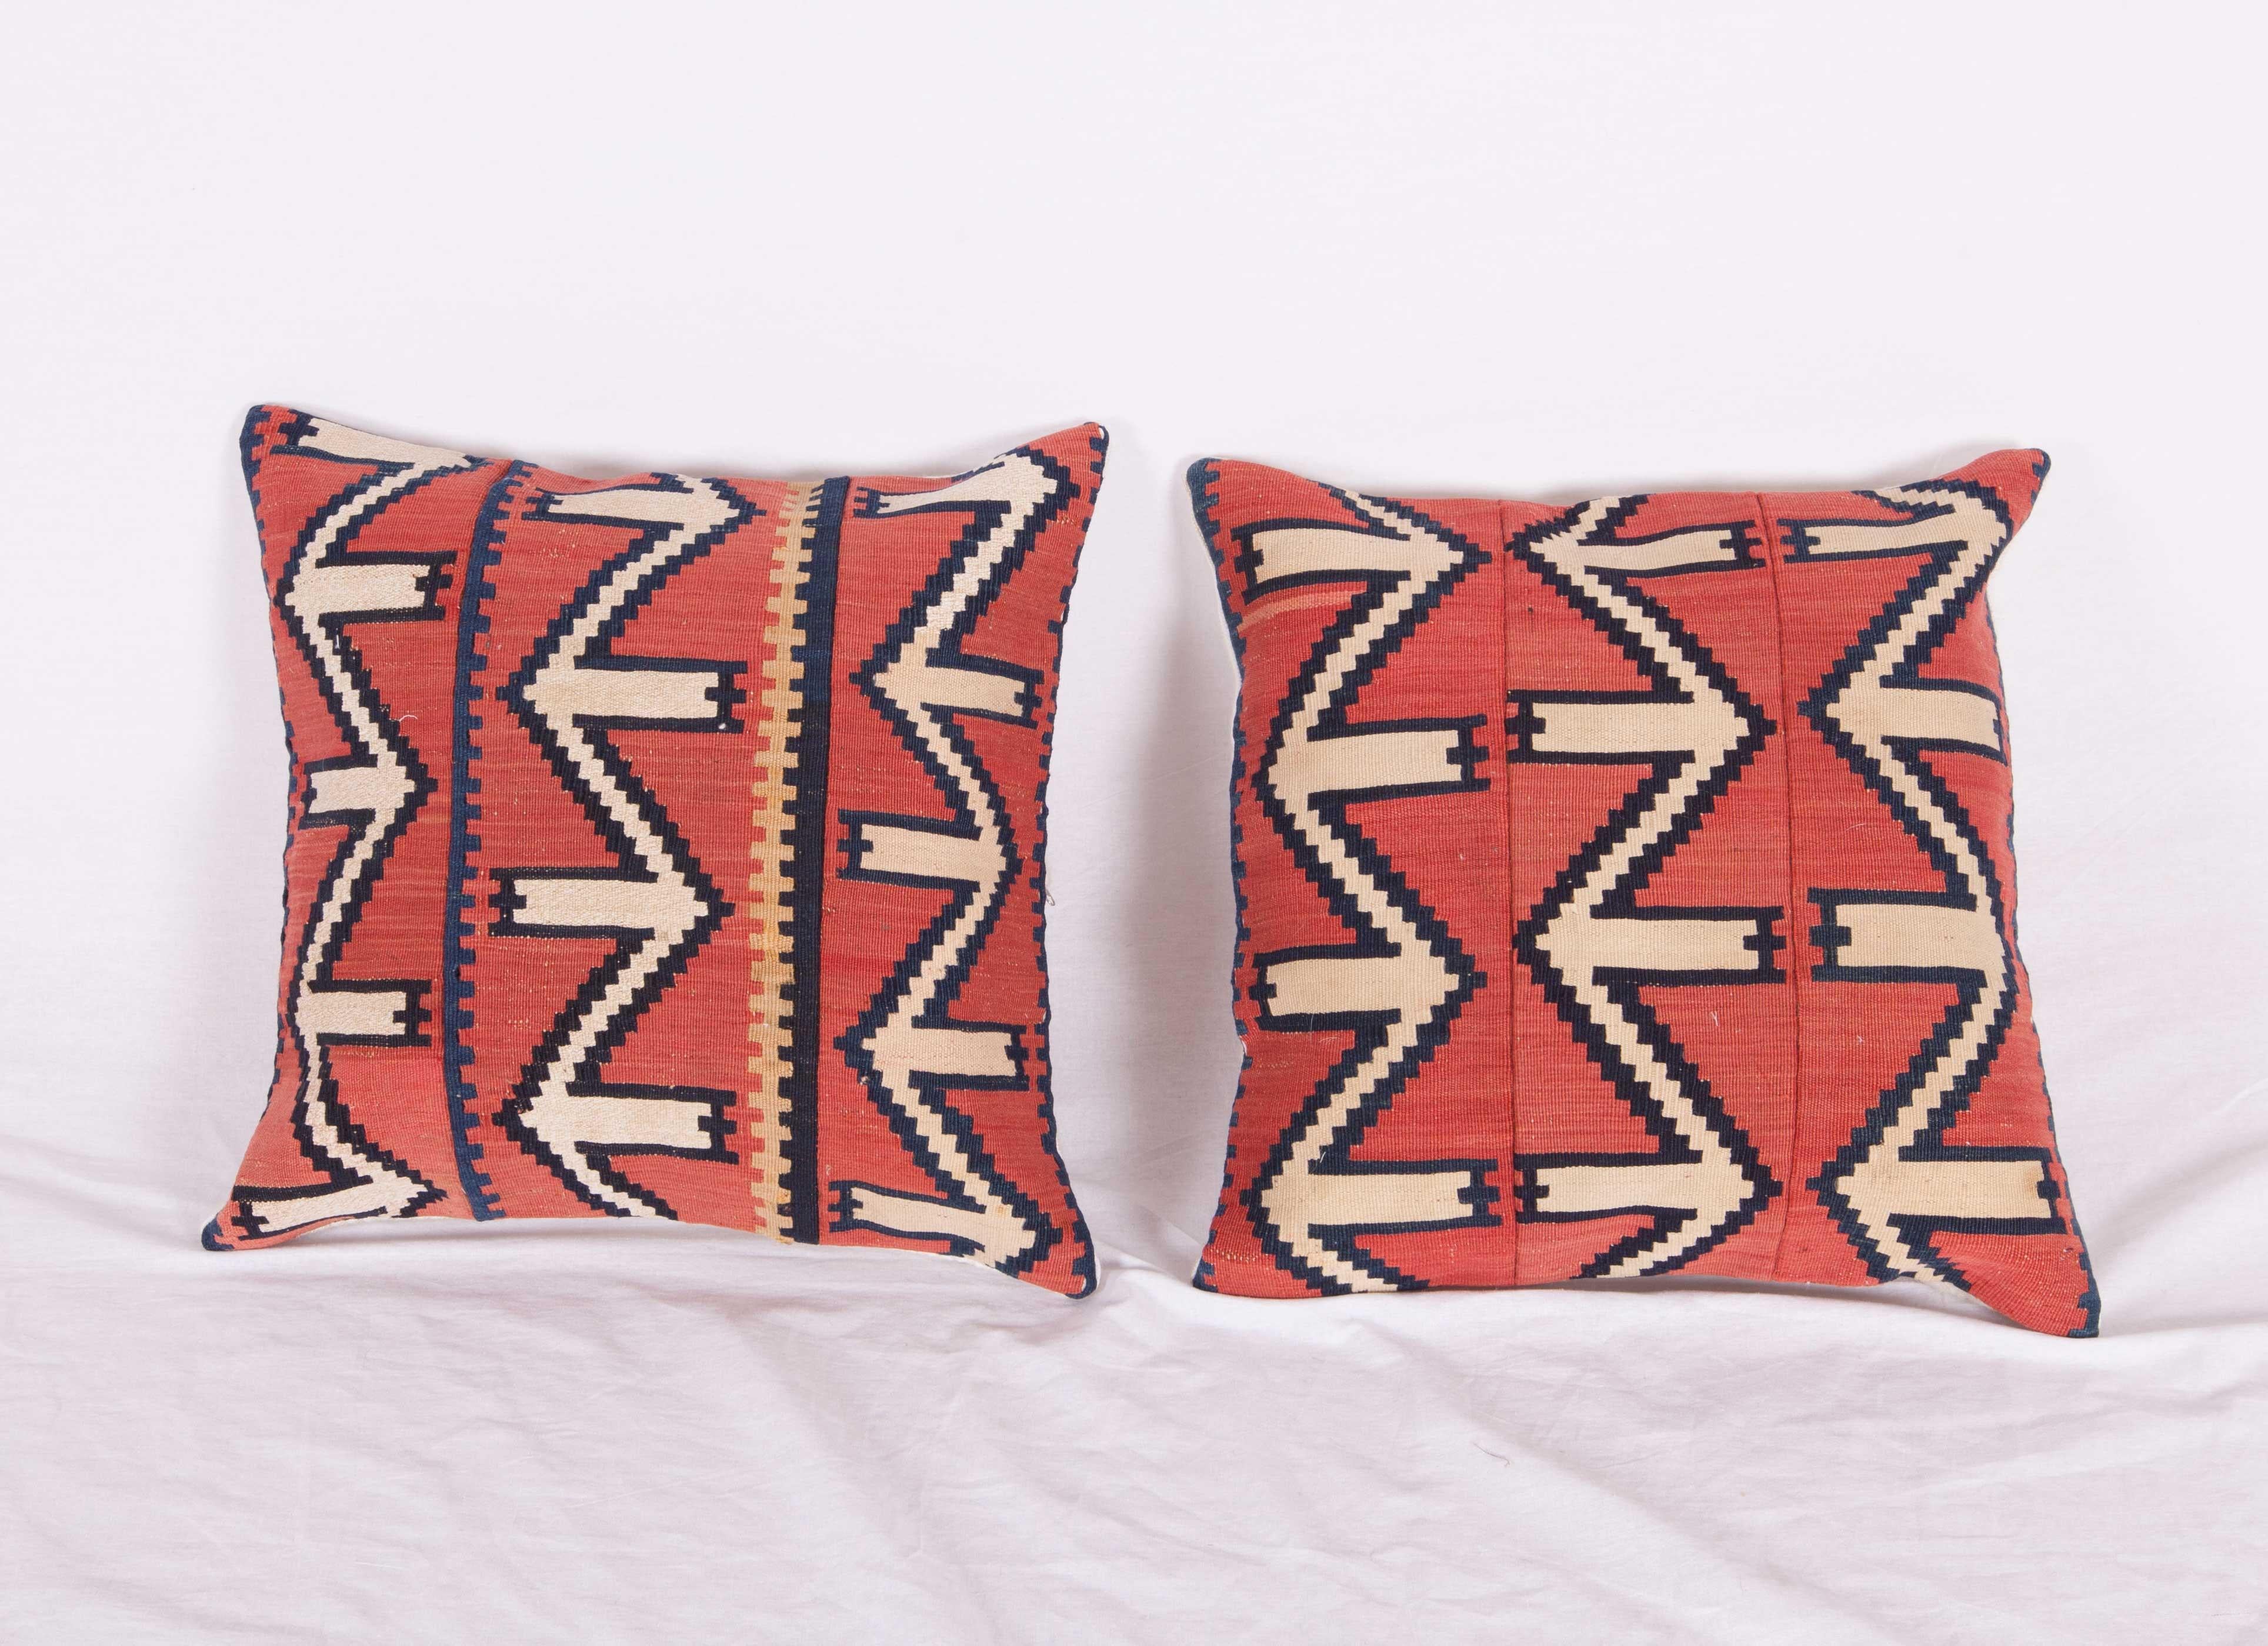 These pillow / cushion covers are made from a late 19th century. Kuba Kilim from Azerbaijan.